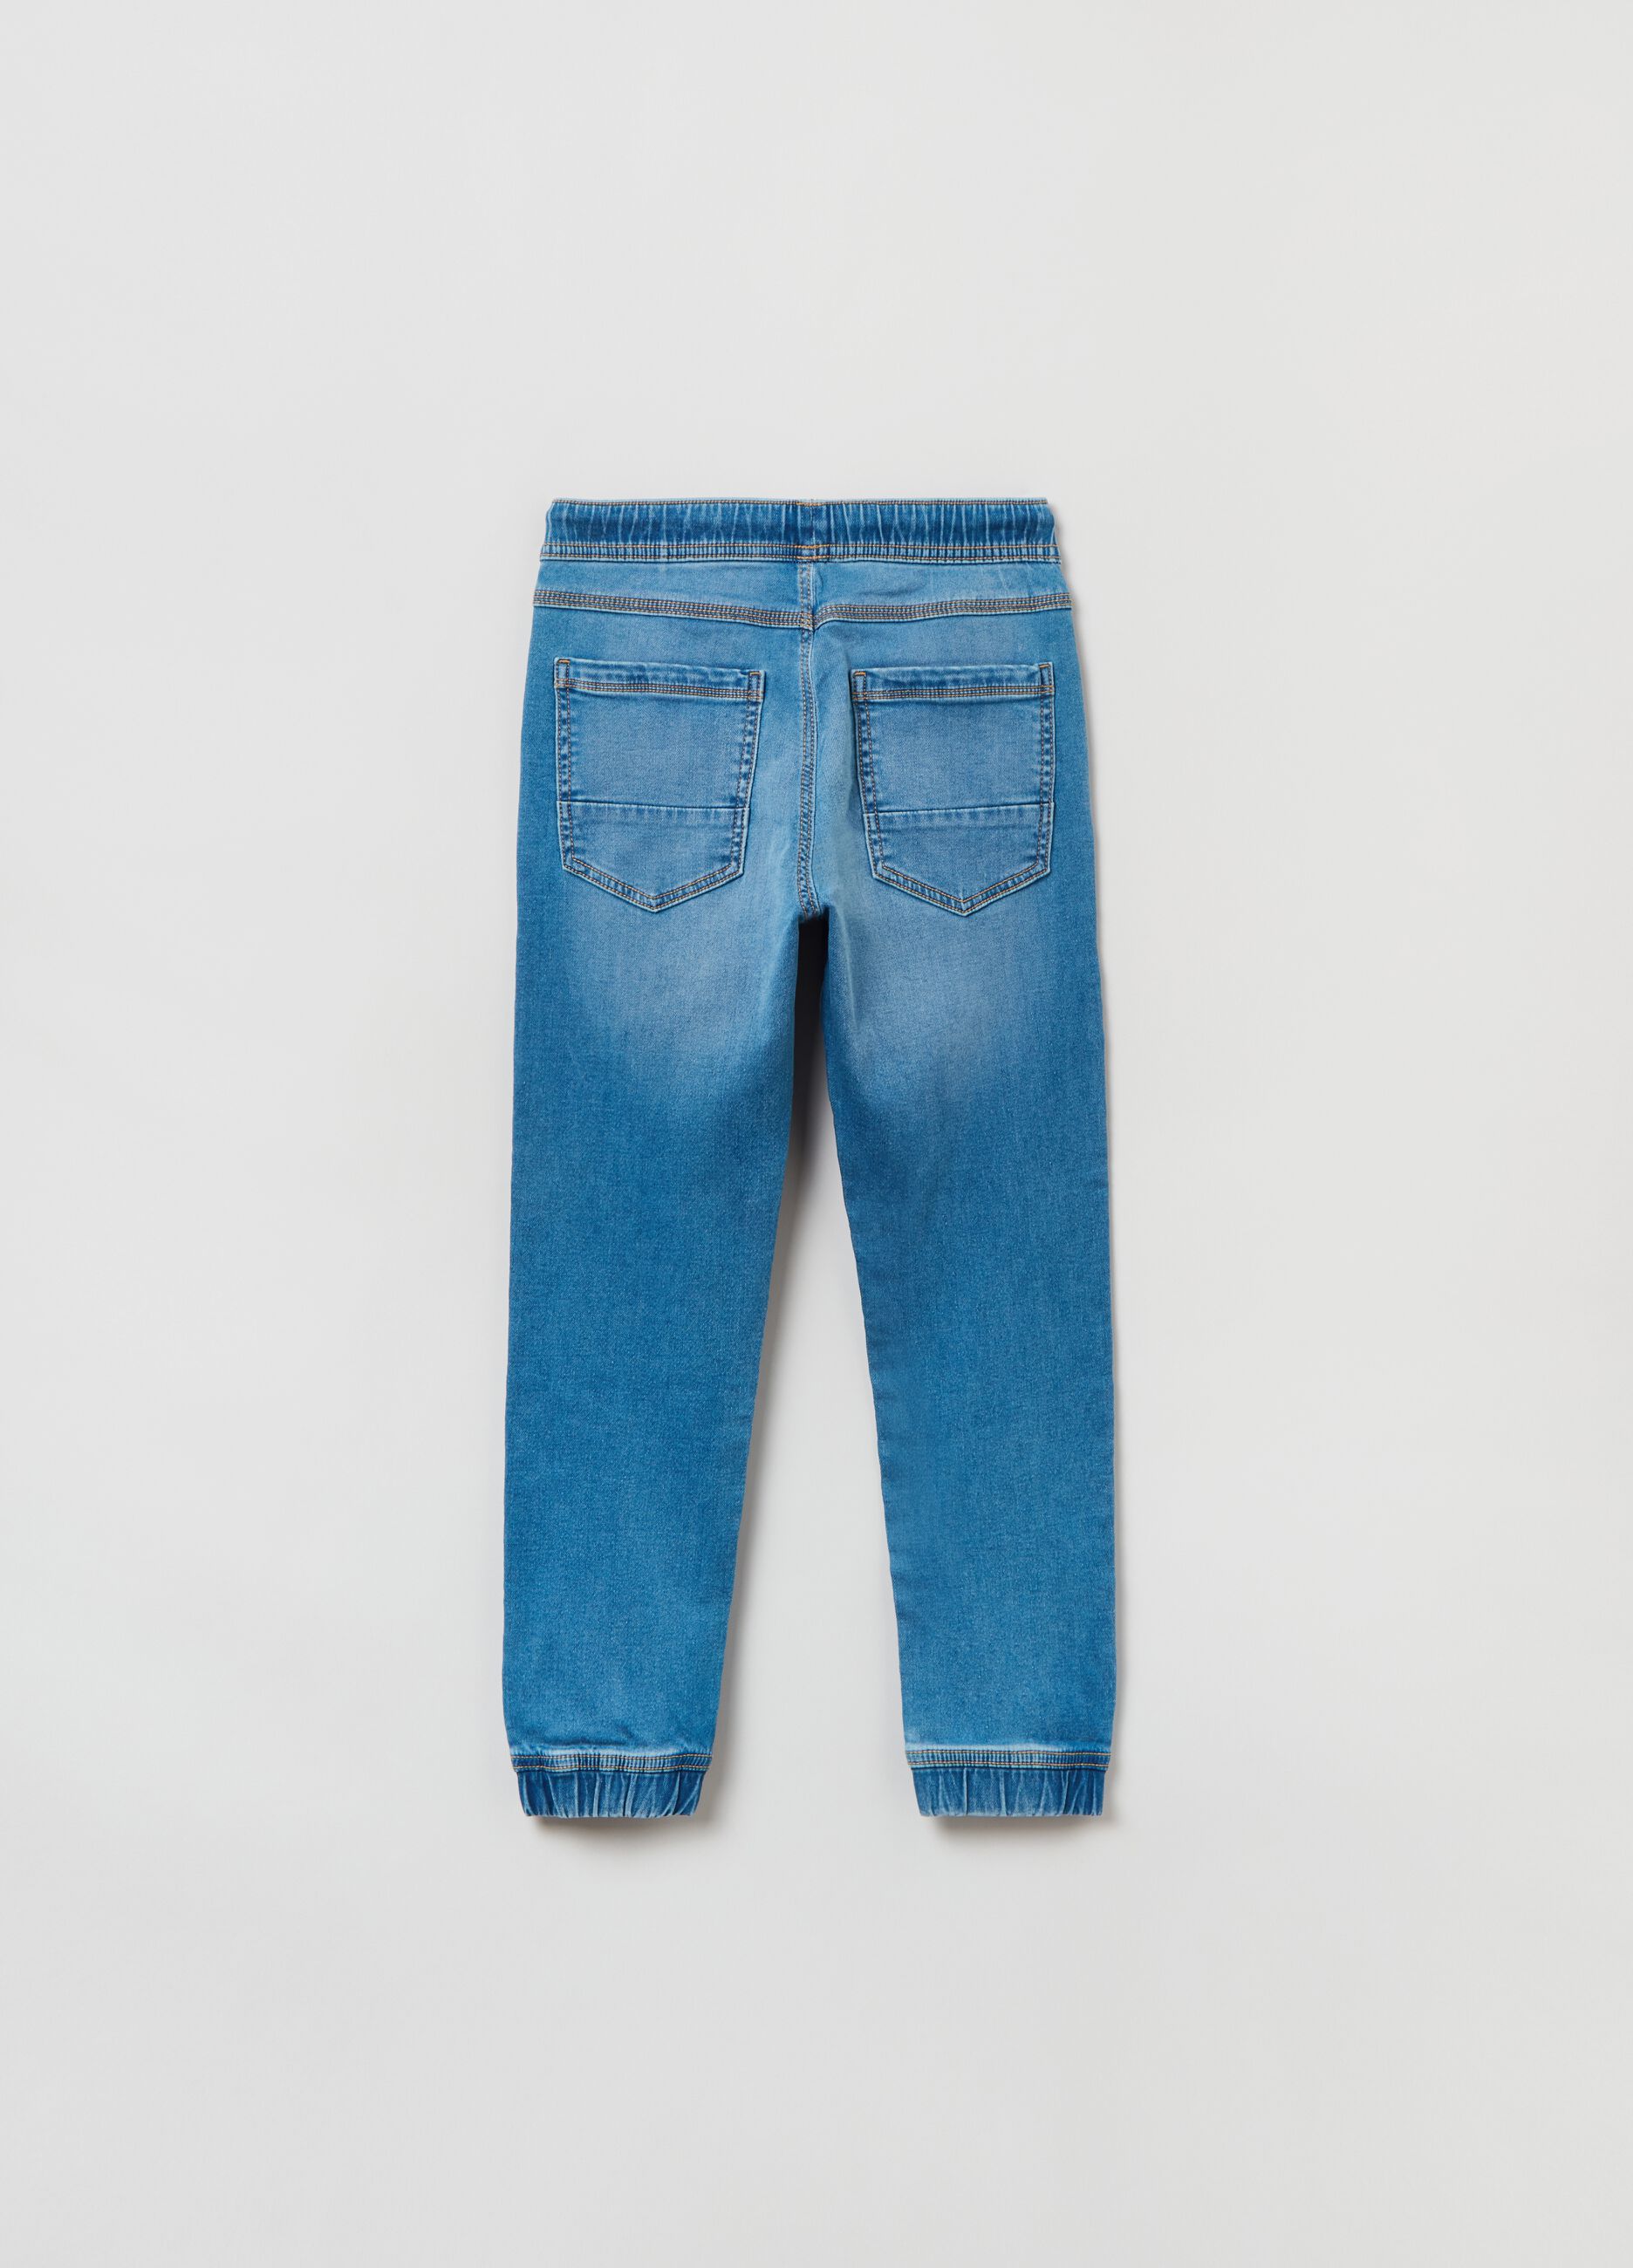 French terry denim joggers_1